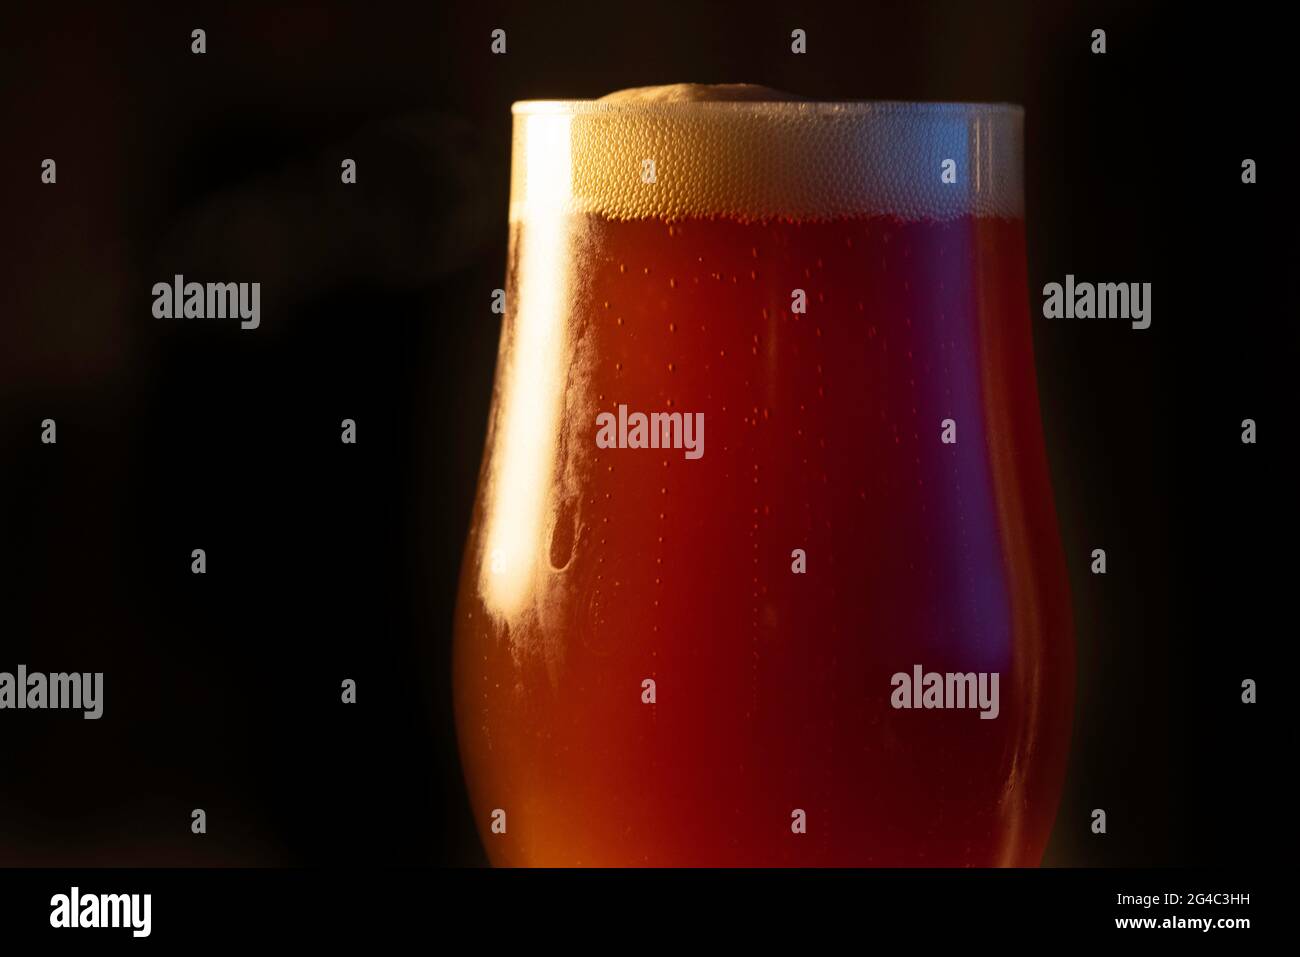 A glass of delicious craft beer served on an authentic beer glass, to be used as a background Stock Photo